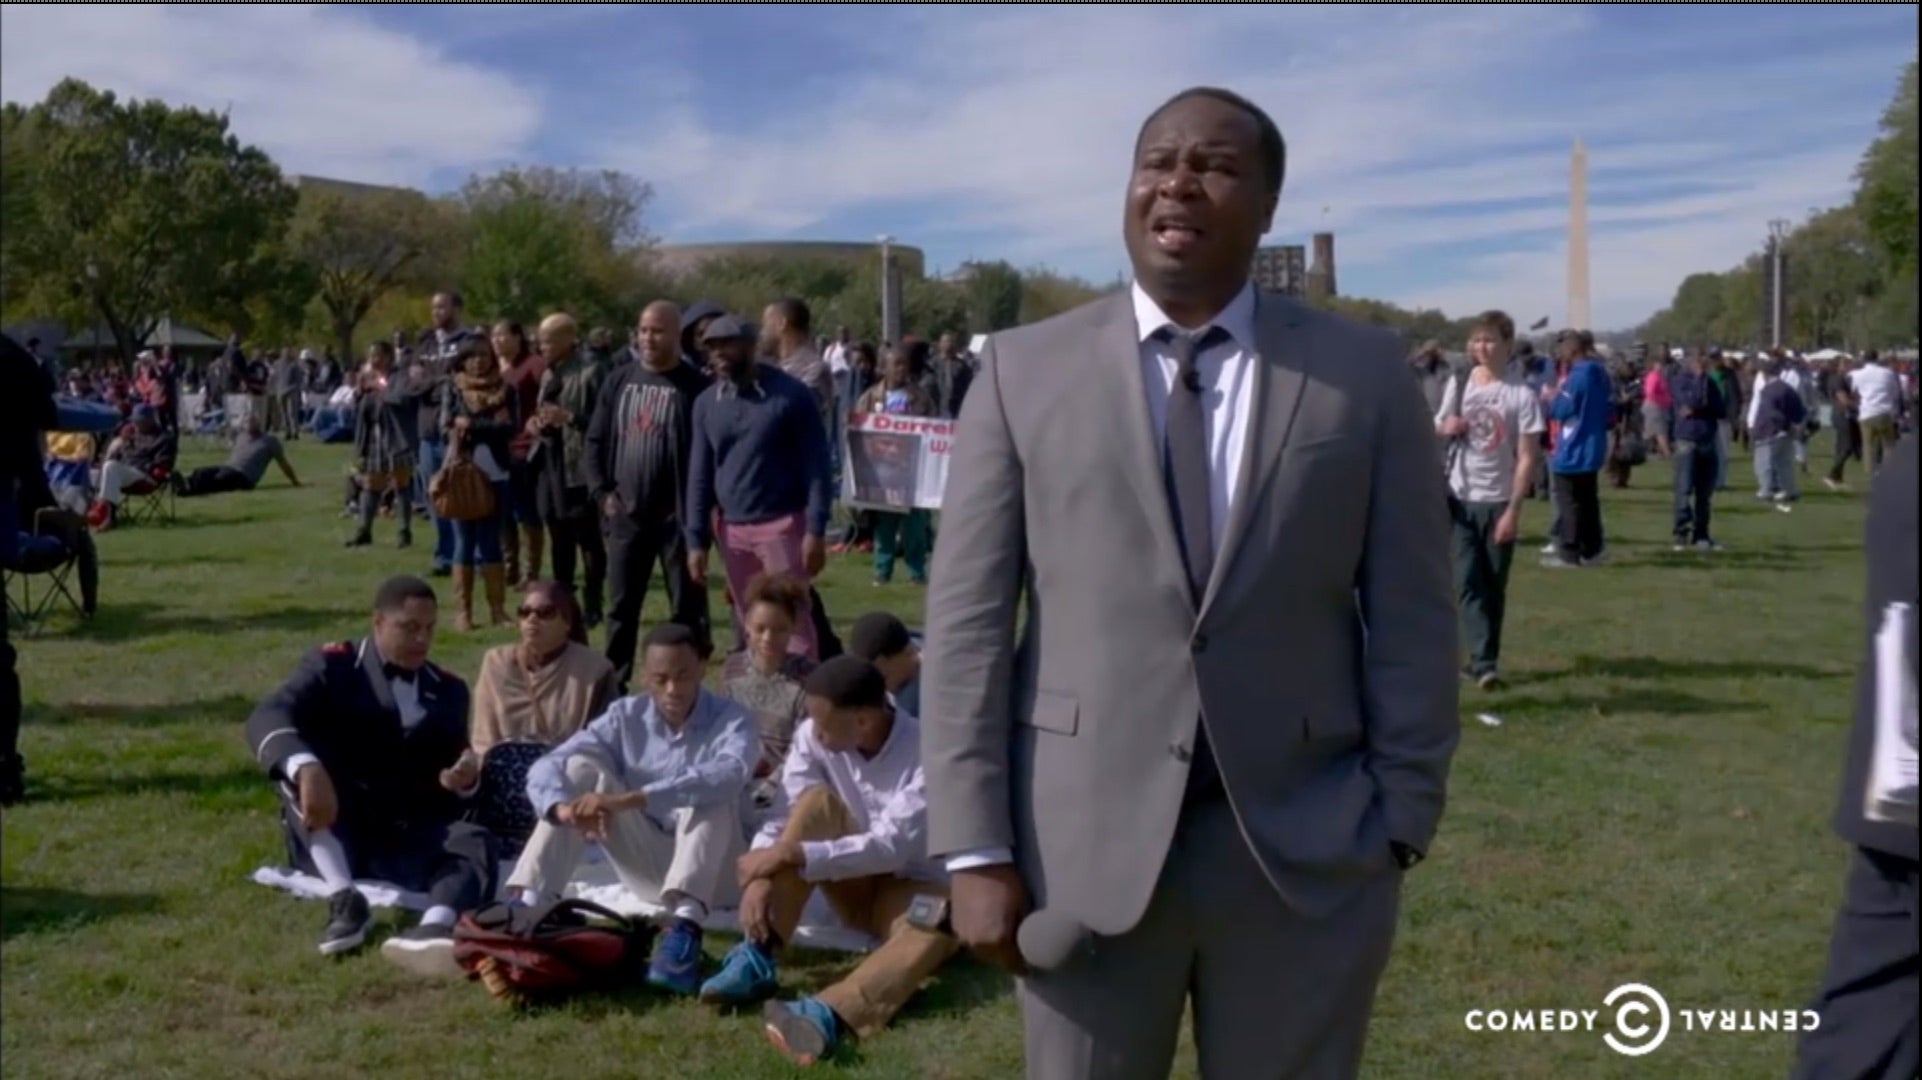 'Daily Show' Correspondent Roy Wood Jr. Crashes Million Man March Anniversary Rally